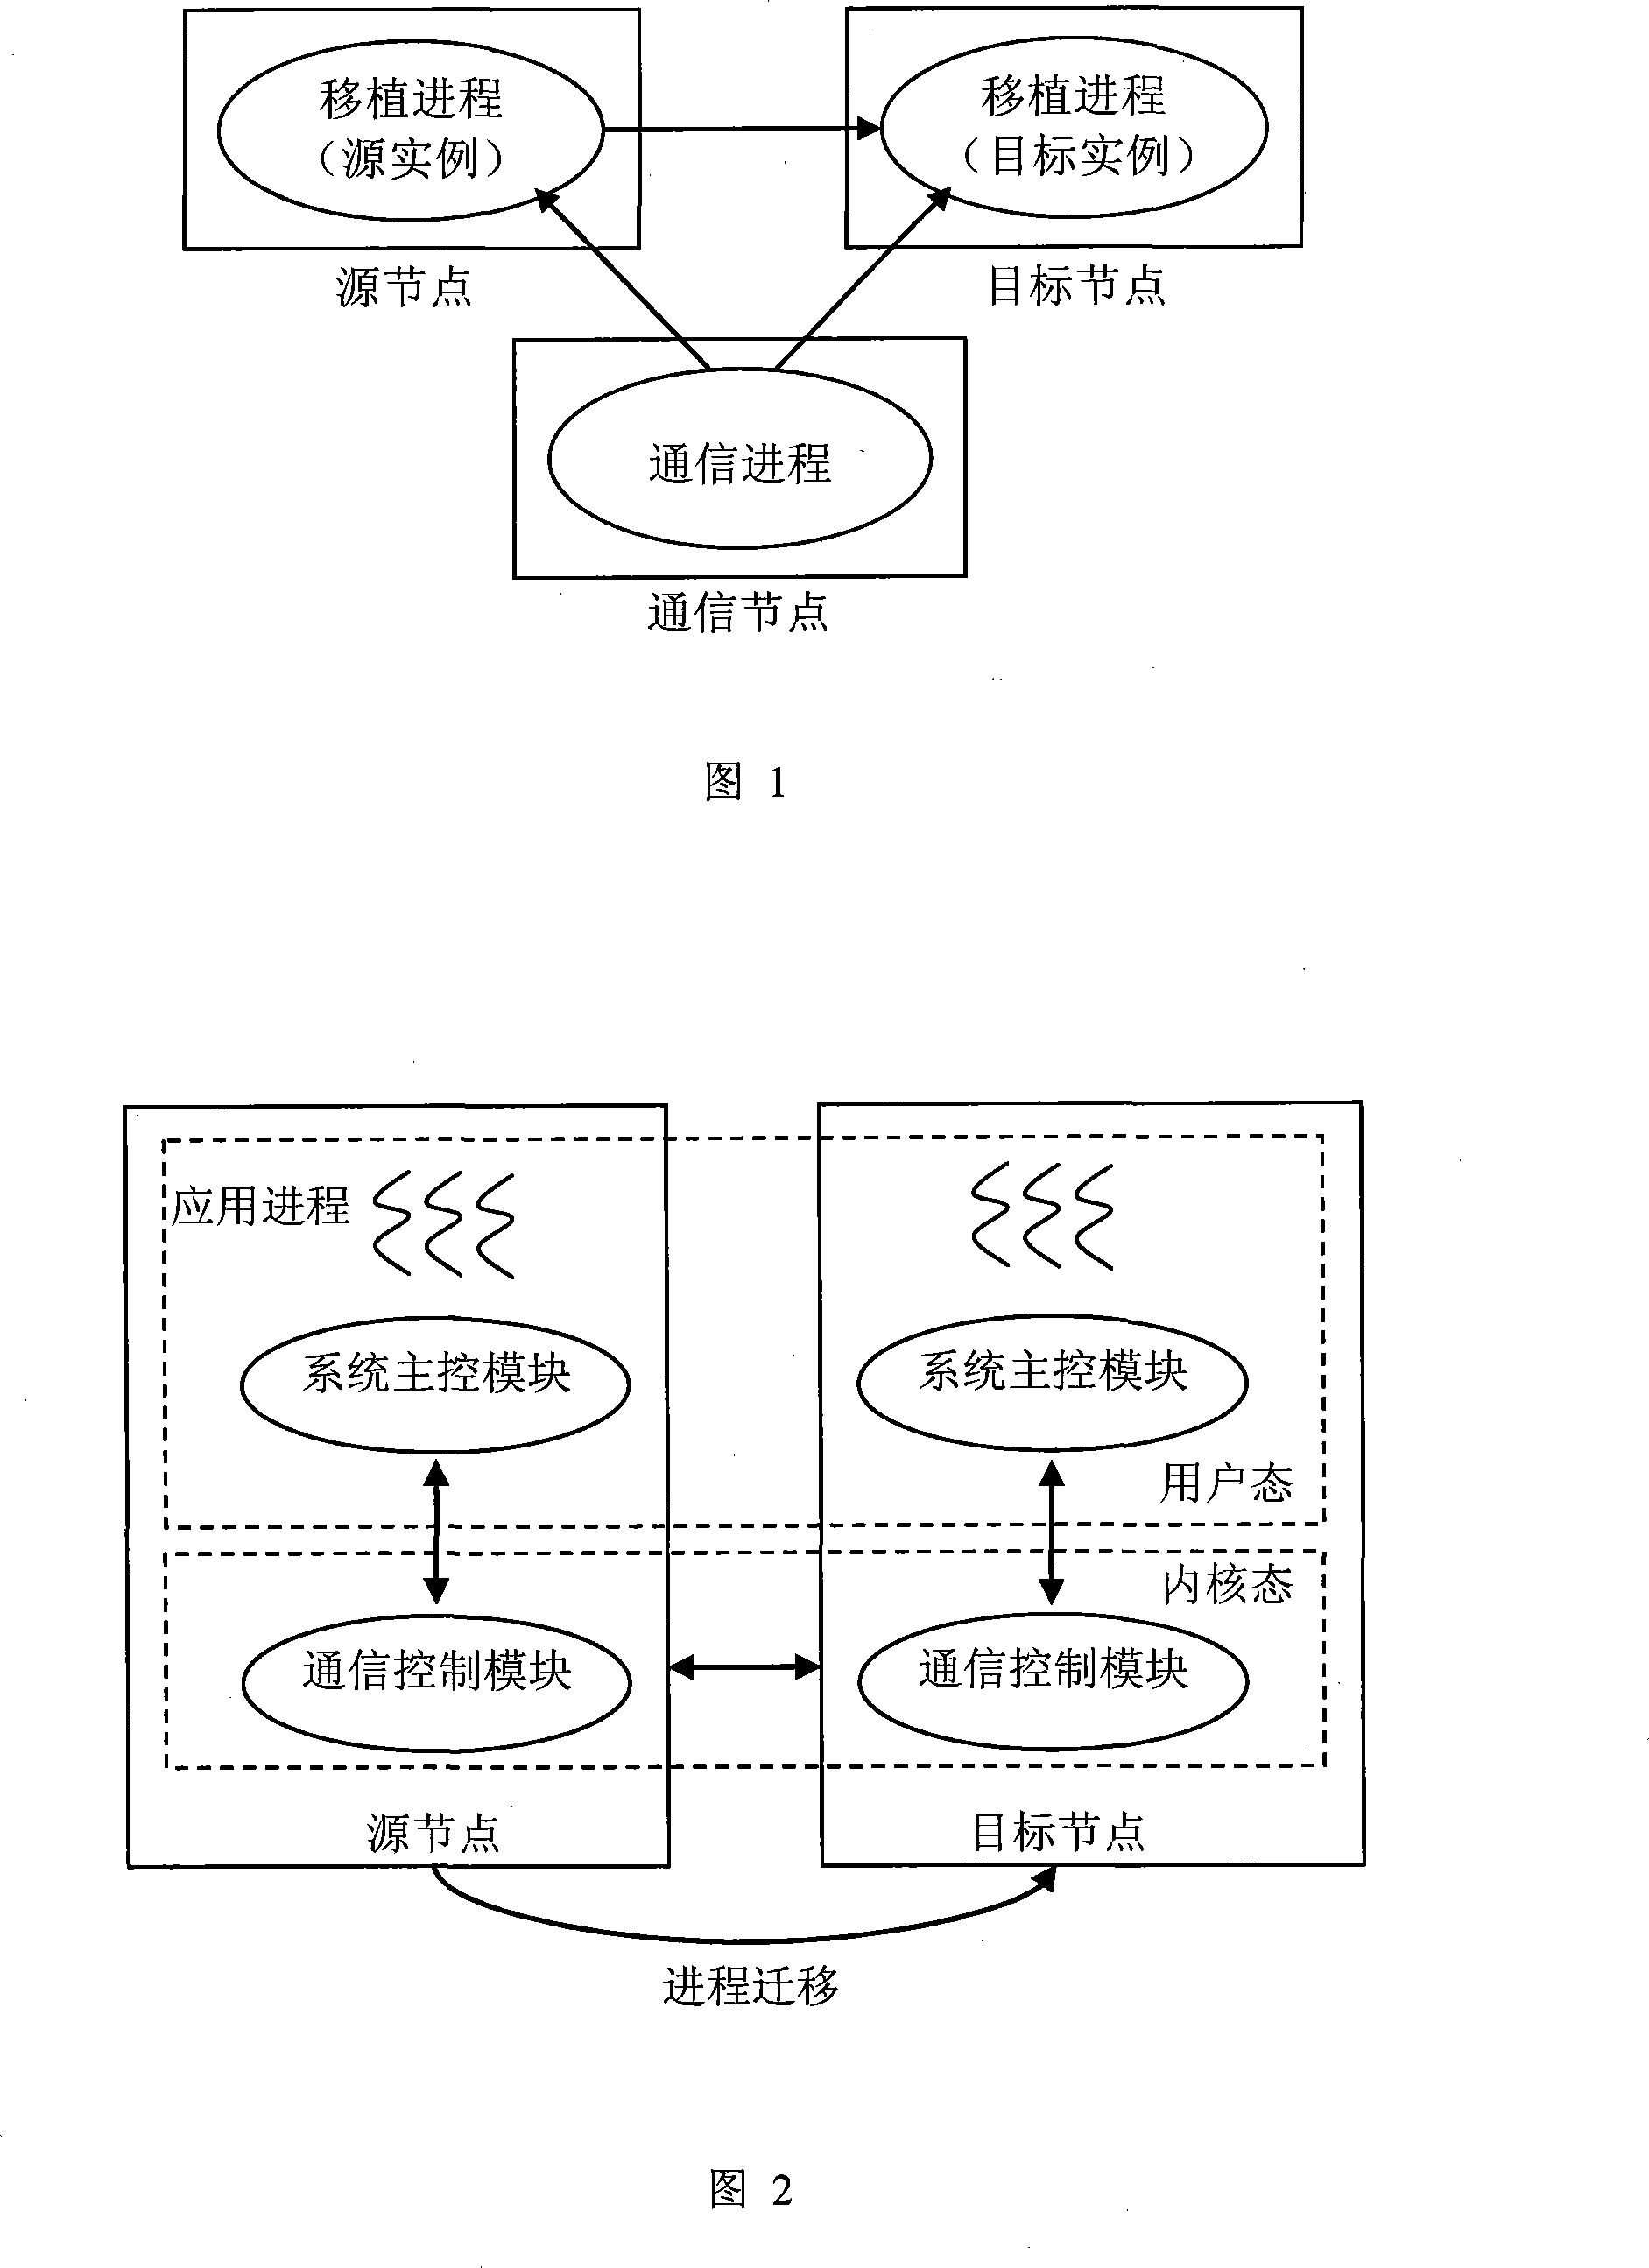 Device and method for implementing transparent course migration